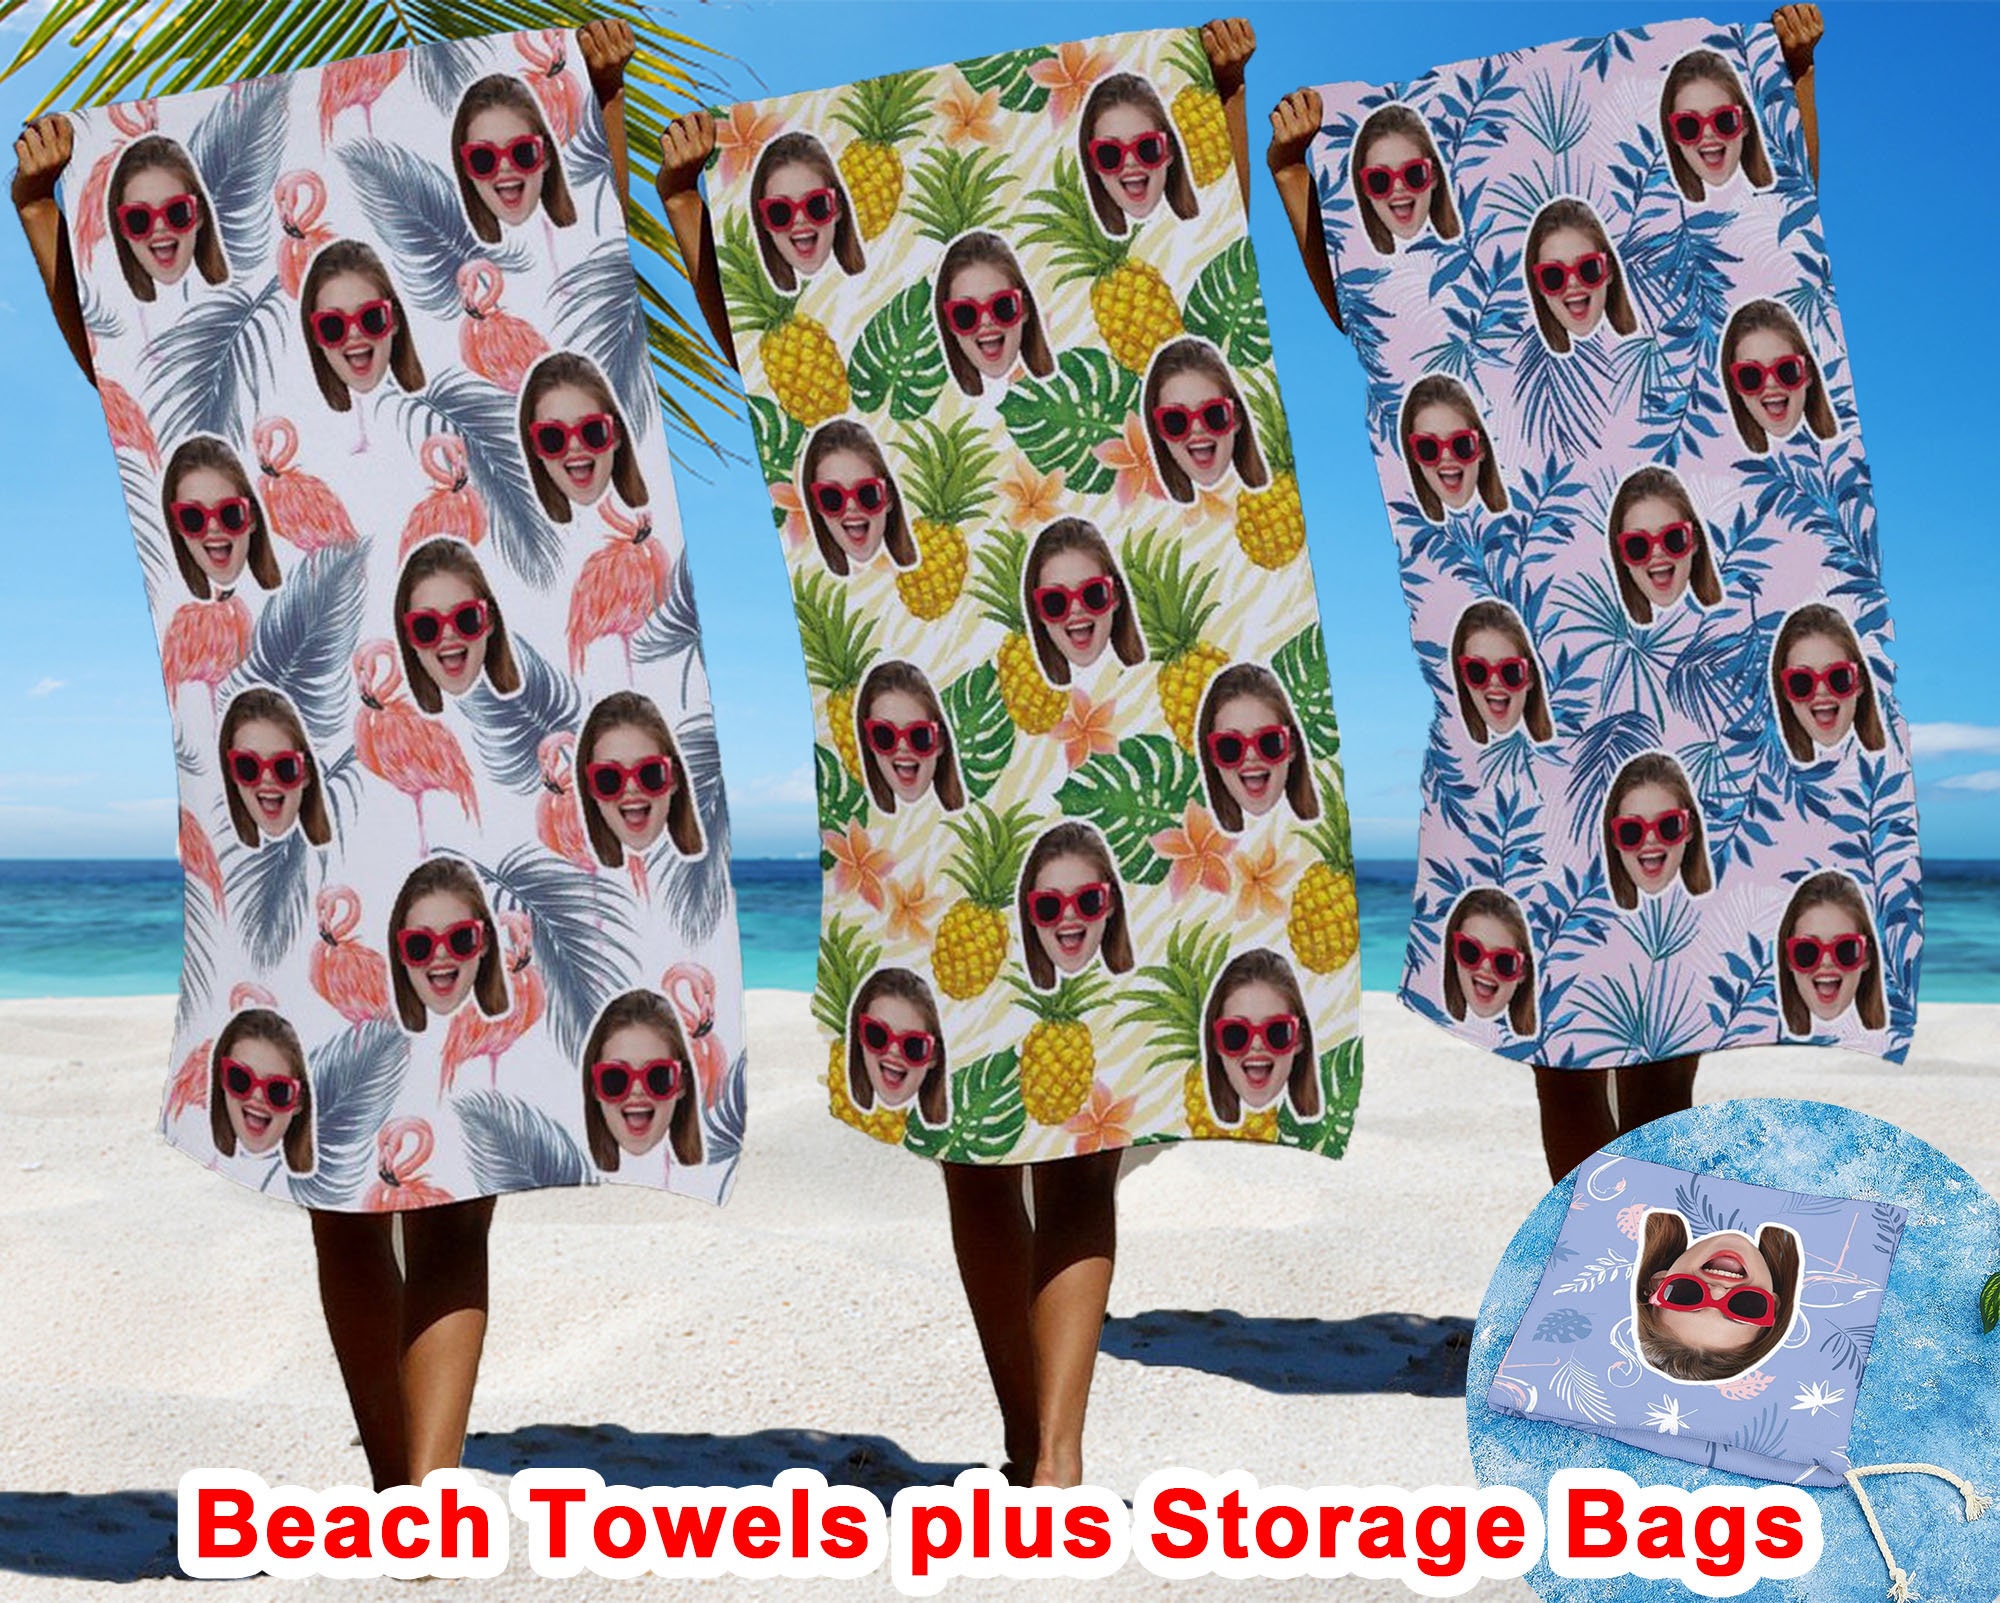 Bath And Hand Towels Body Towels Extra Large Microfiber Beach Towel  Oversize Towels Tie Dye Cool Travel Pool Towel Ideal Gift For Women Men Mom  Dad